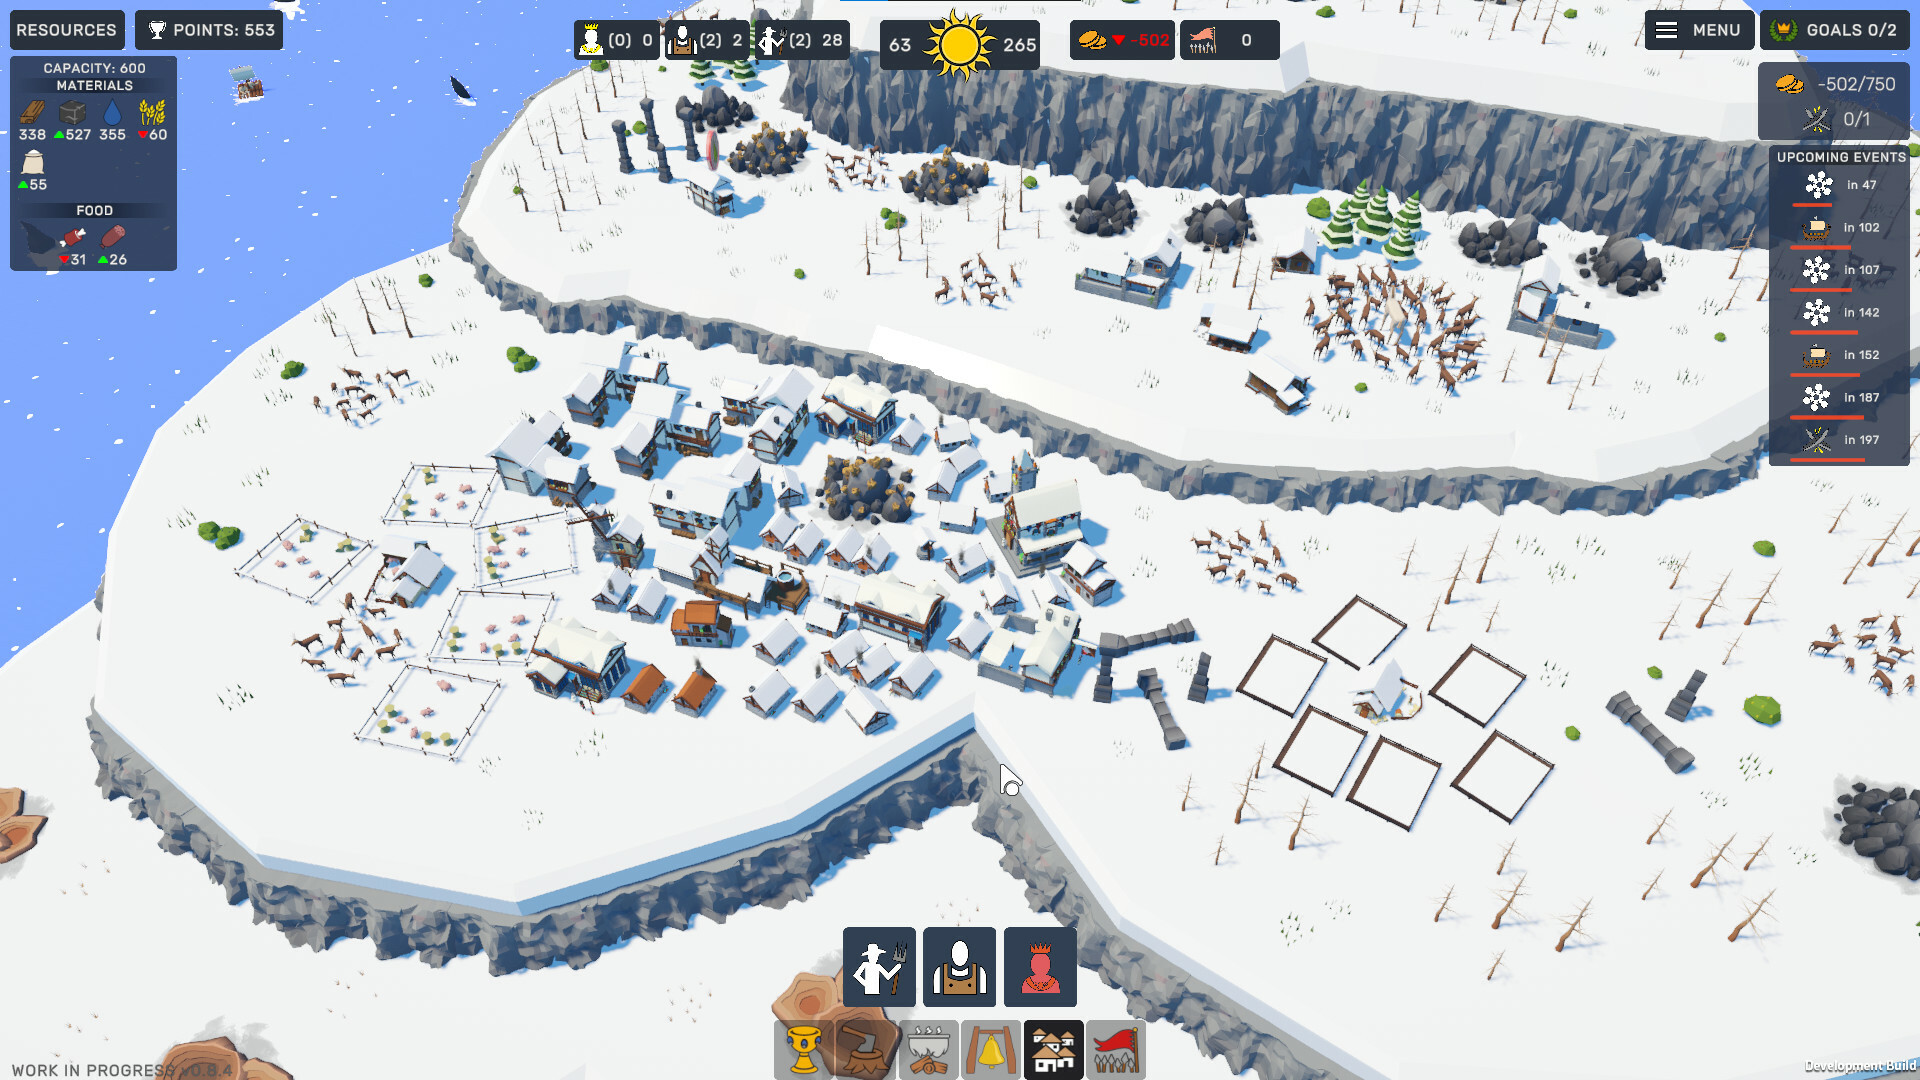 Citizens: Far Lands - Prologue Free Download for PC